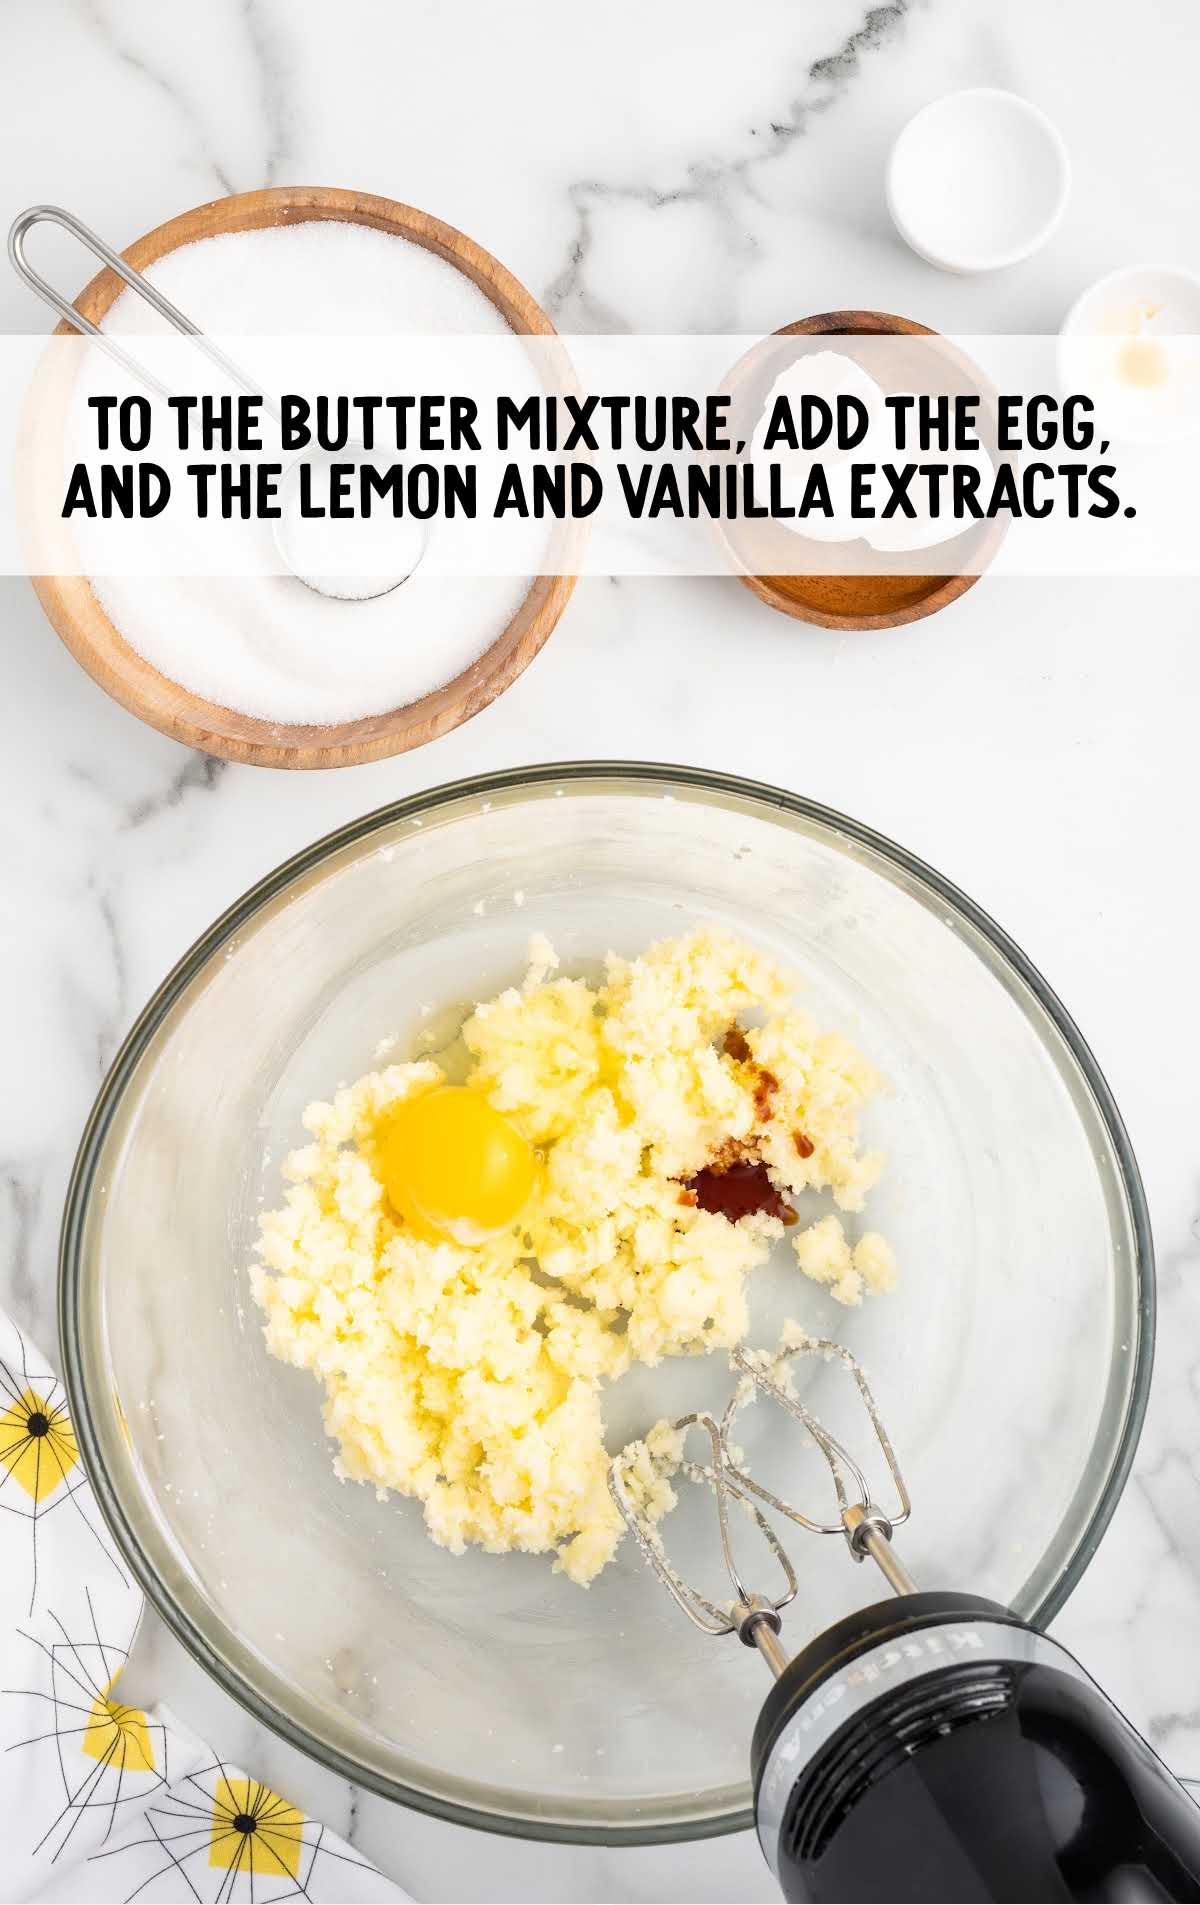 egg, lemon, and vanilla added to the butter mixture